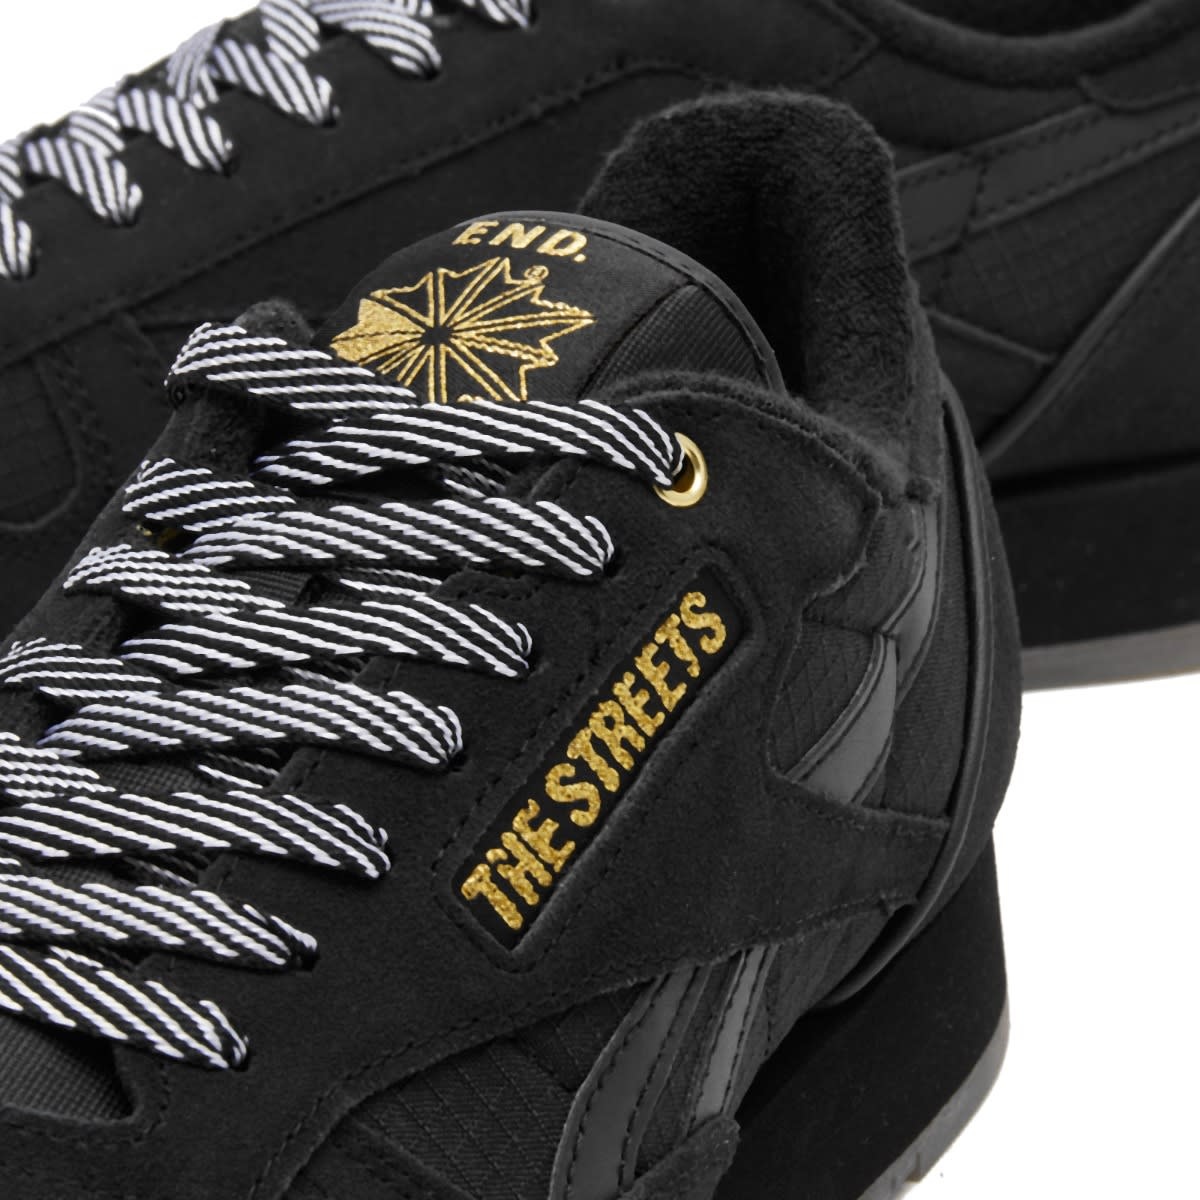 Reebok x The Streets by END. Classic Leather - 3